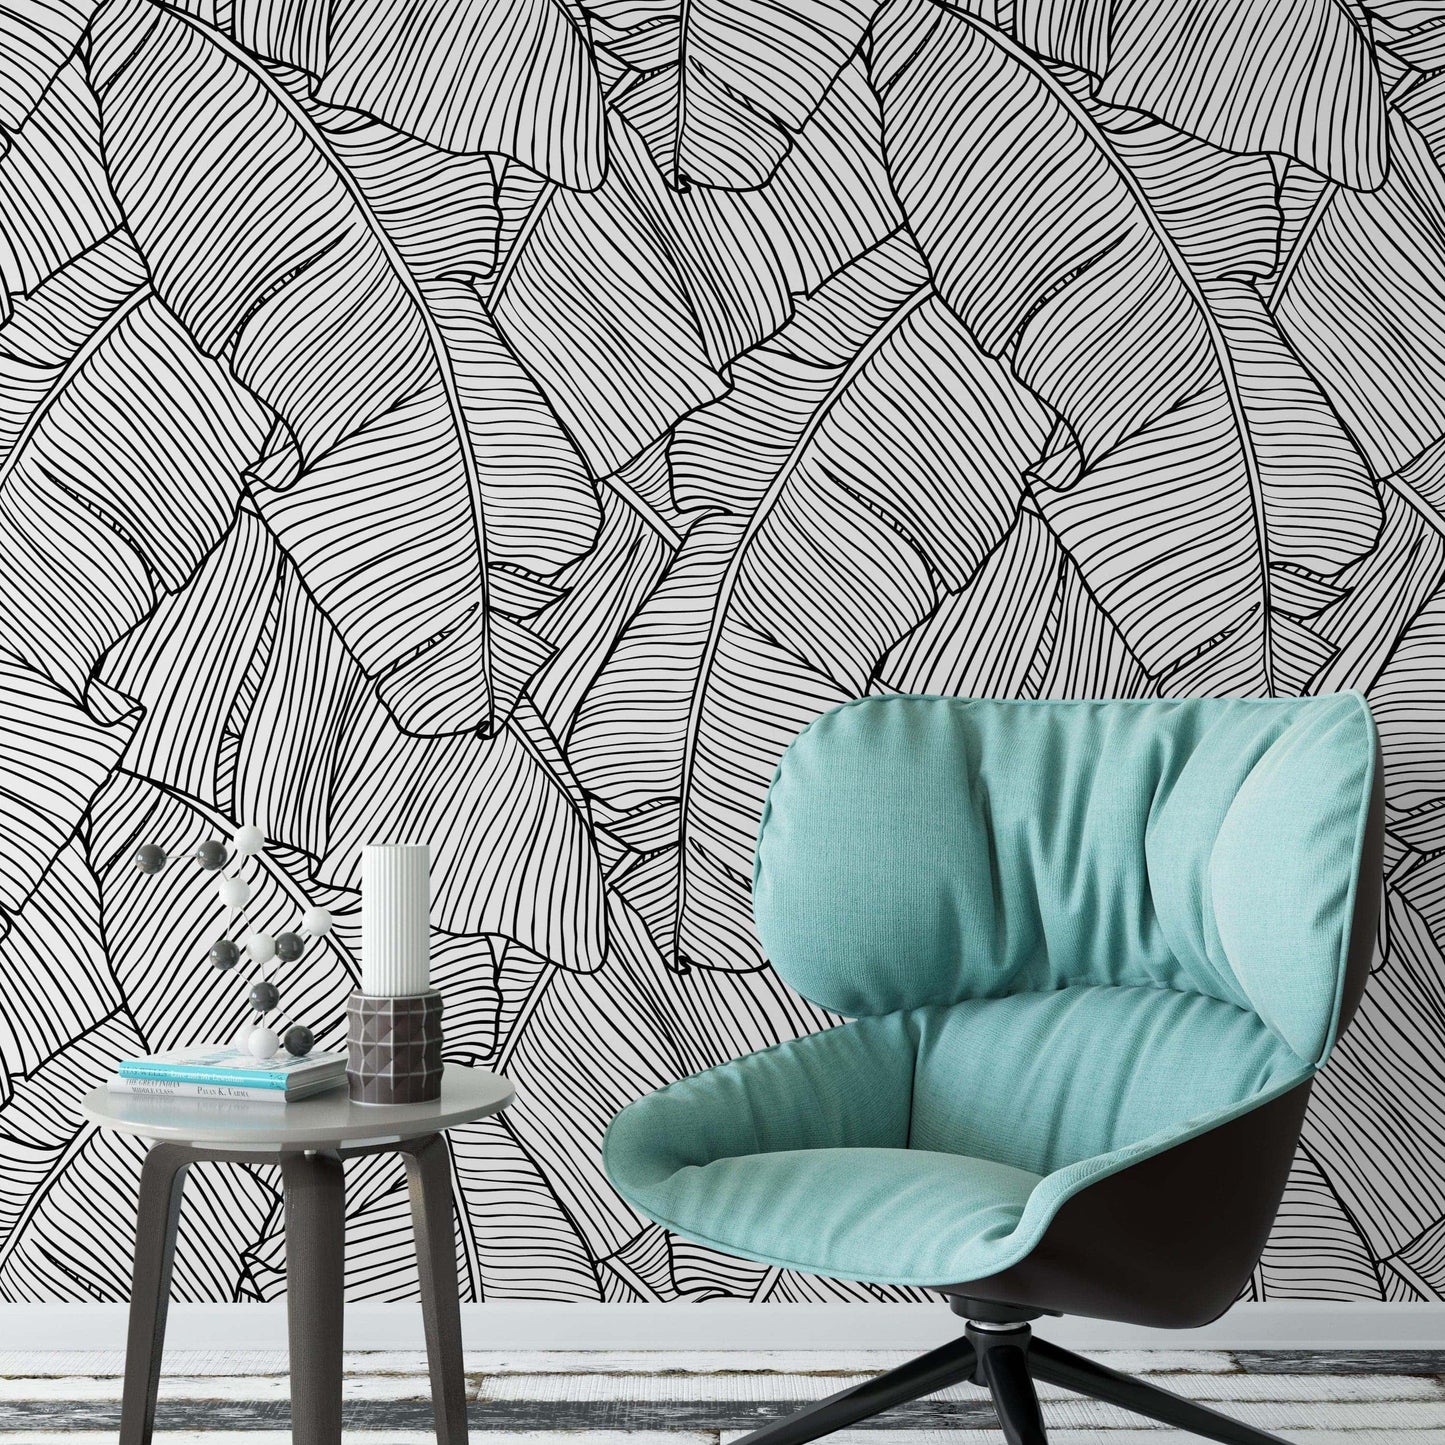 Black and White Watercolor Tropical Palm Leaves Wallpaper Black and White Watercolor Tropical Palm Leaves Wallpaper Black and White Tropical Banana Leaves Wallpaper 